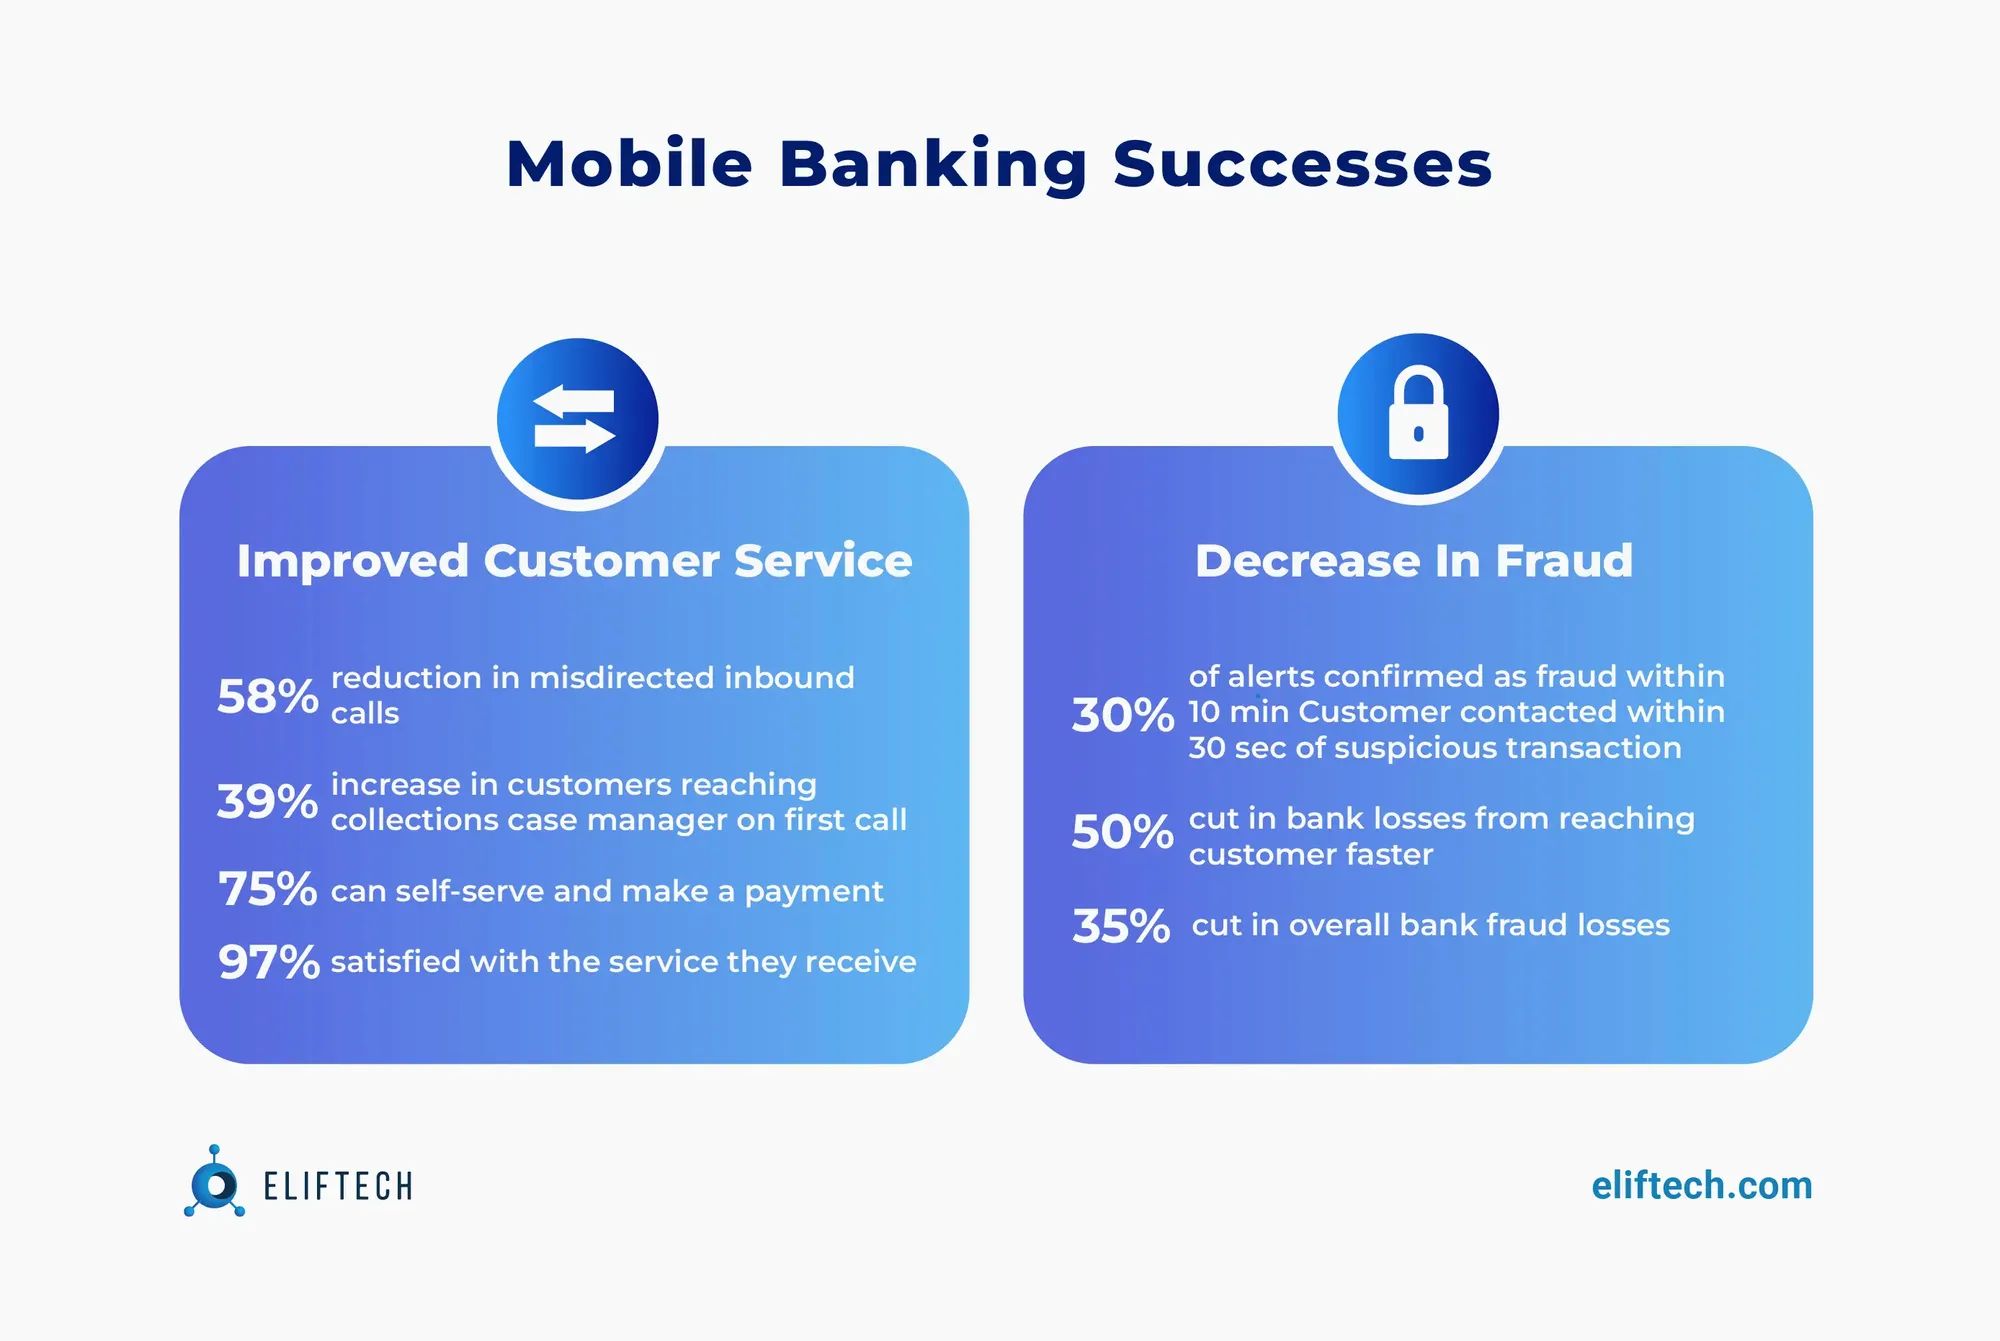 Mobile banking successes